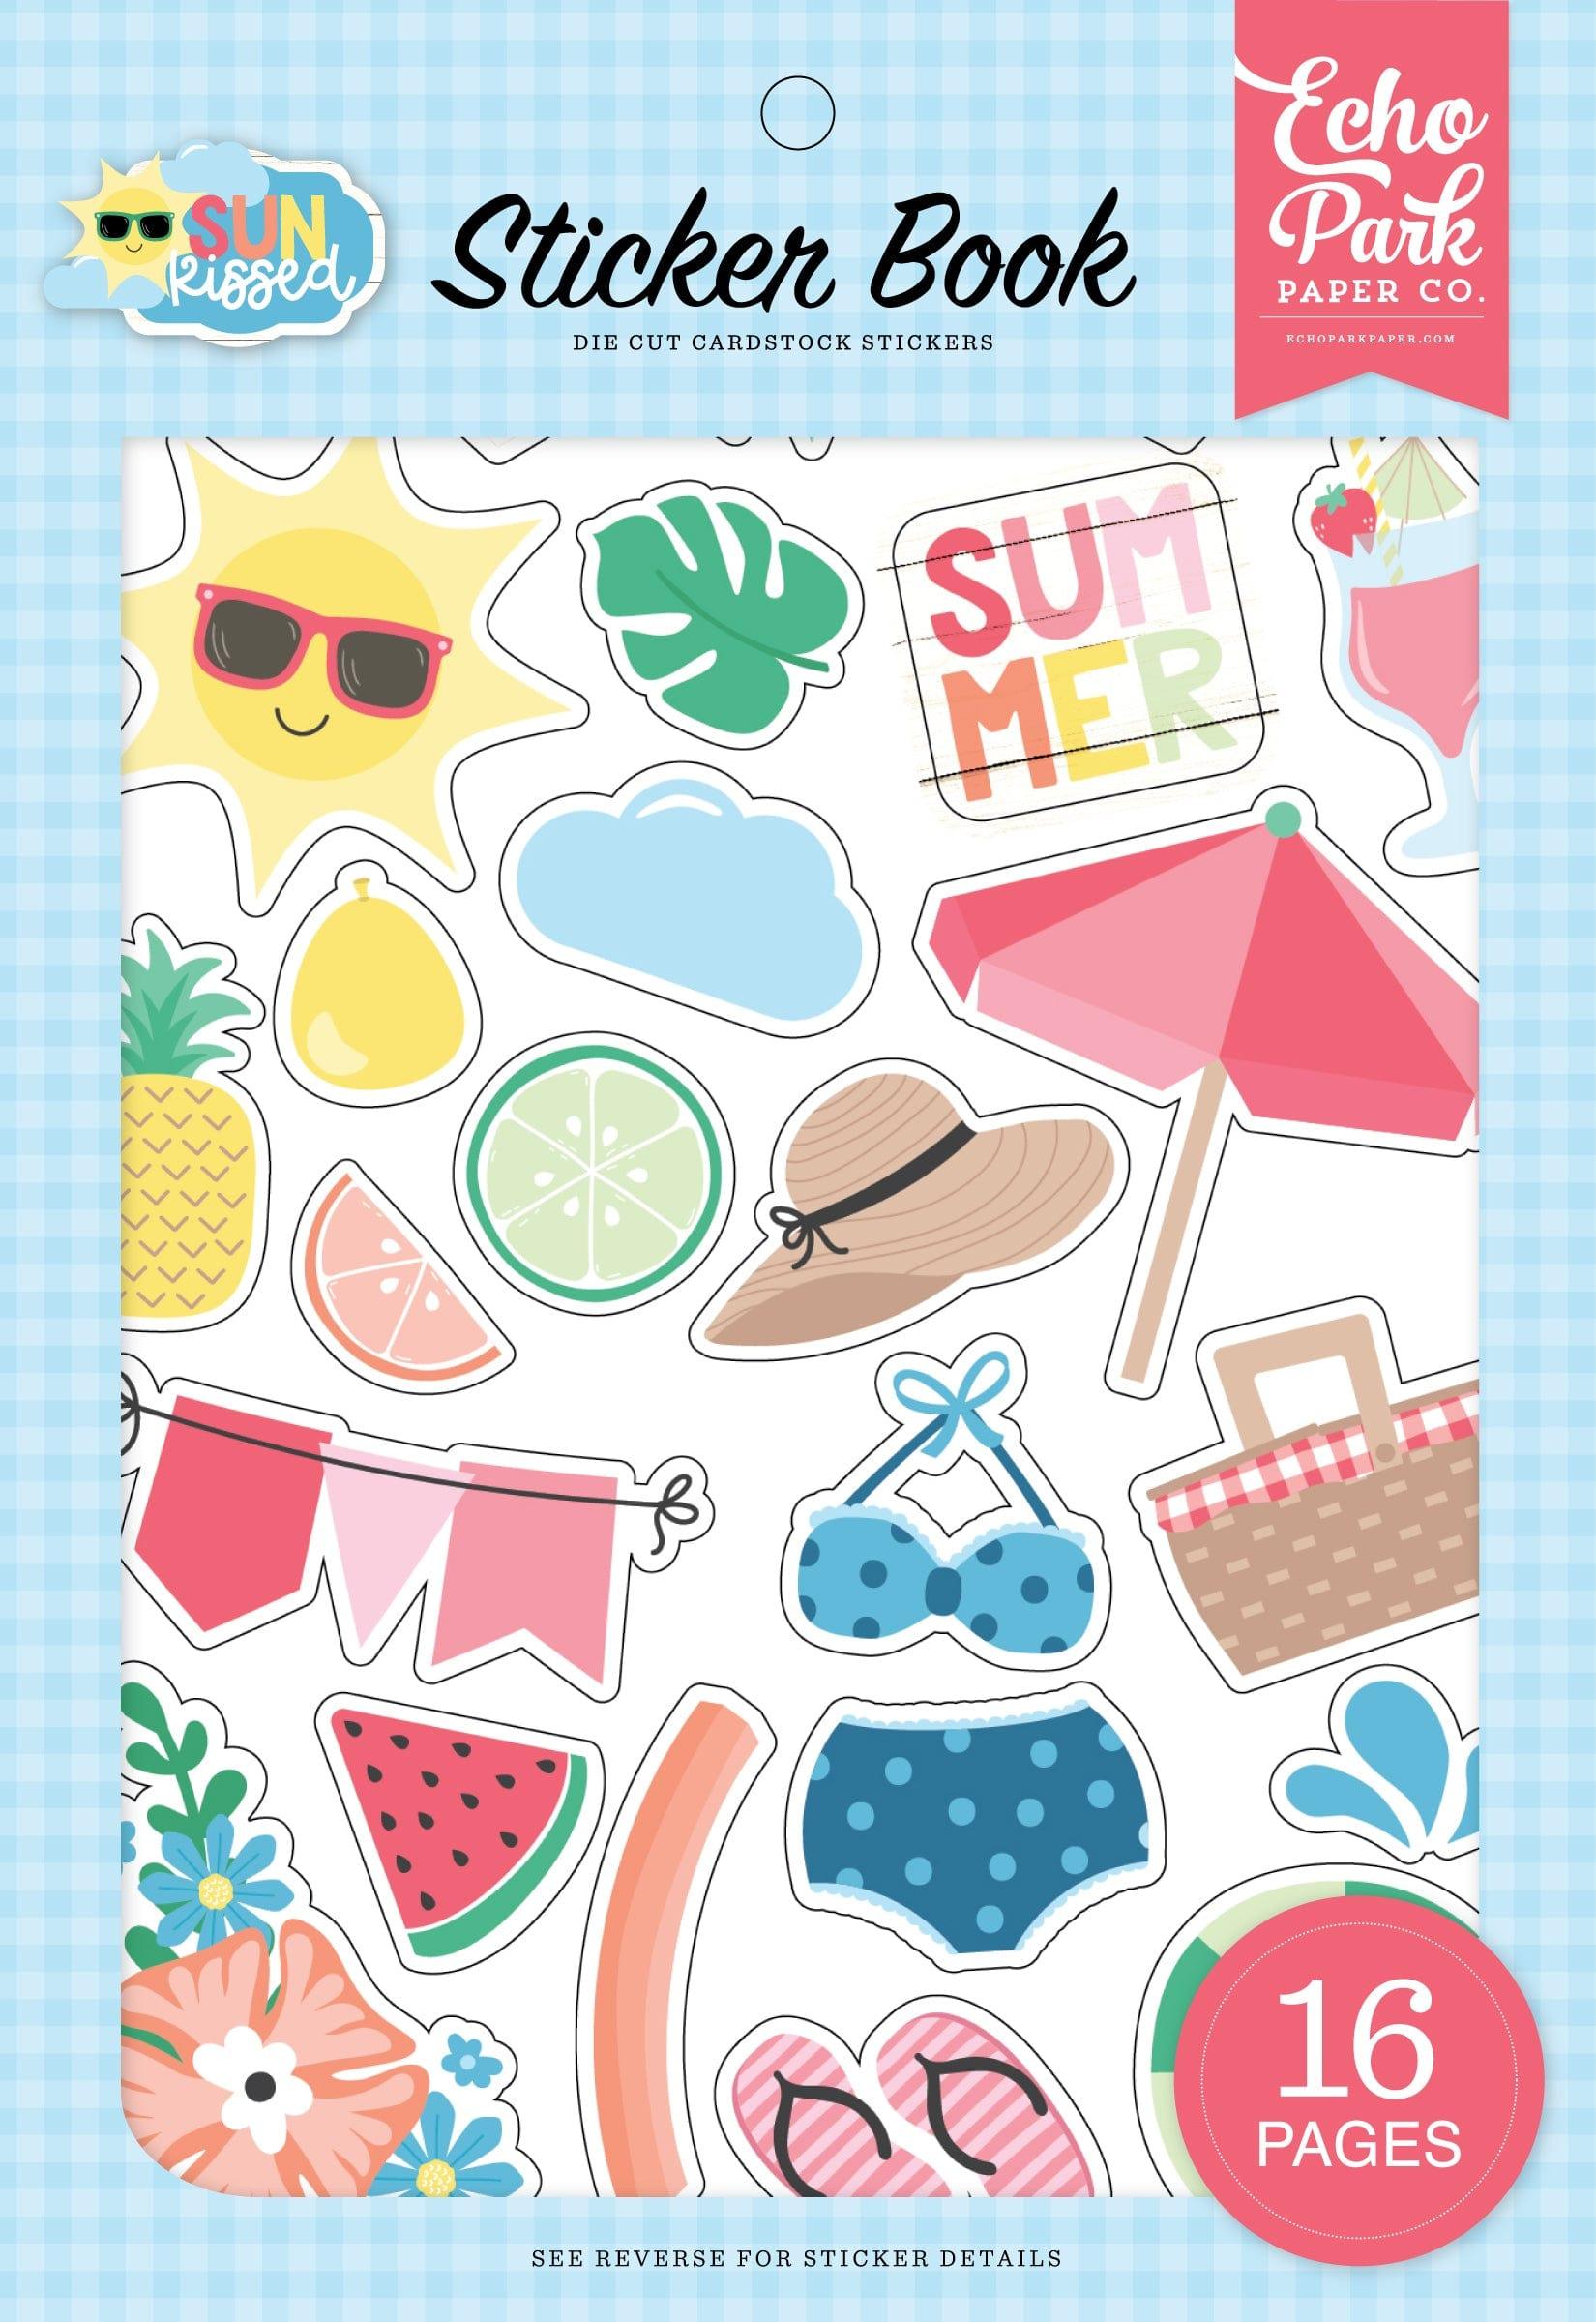 Sun Kissed Collection 5 x 7 Scrapbook Sticker Book by Echo Park Paper